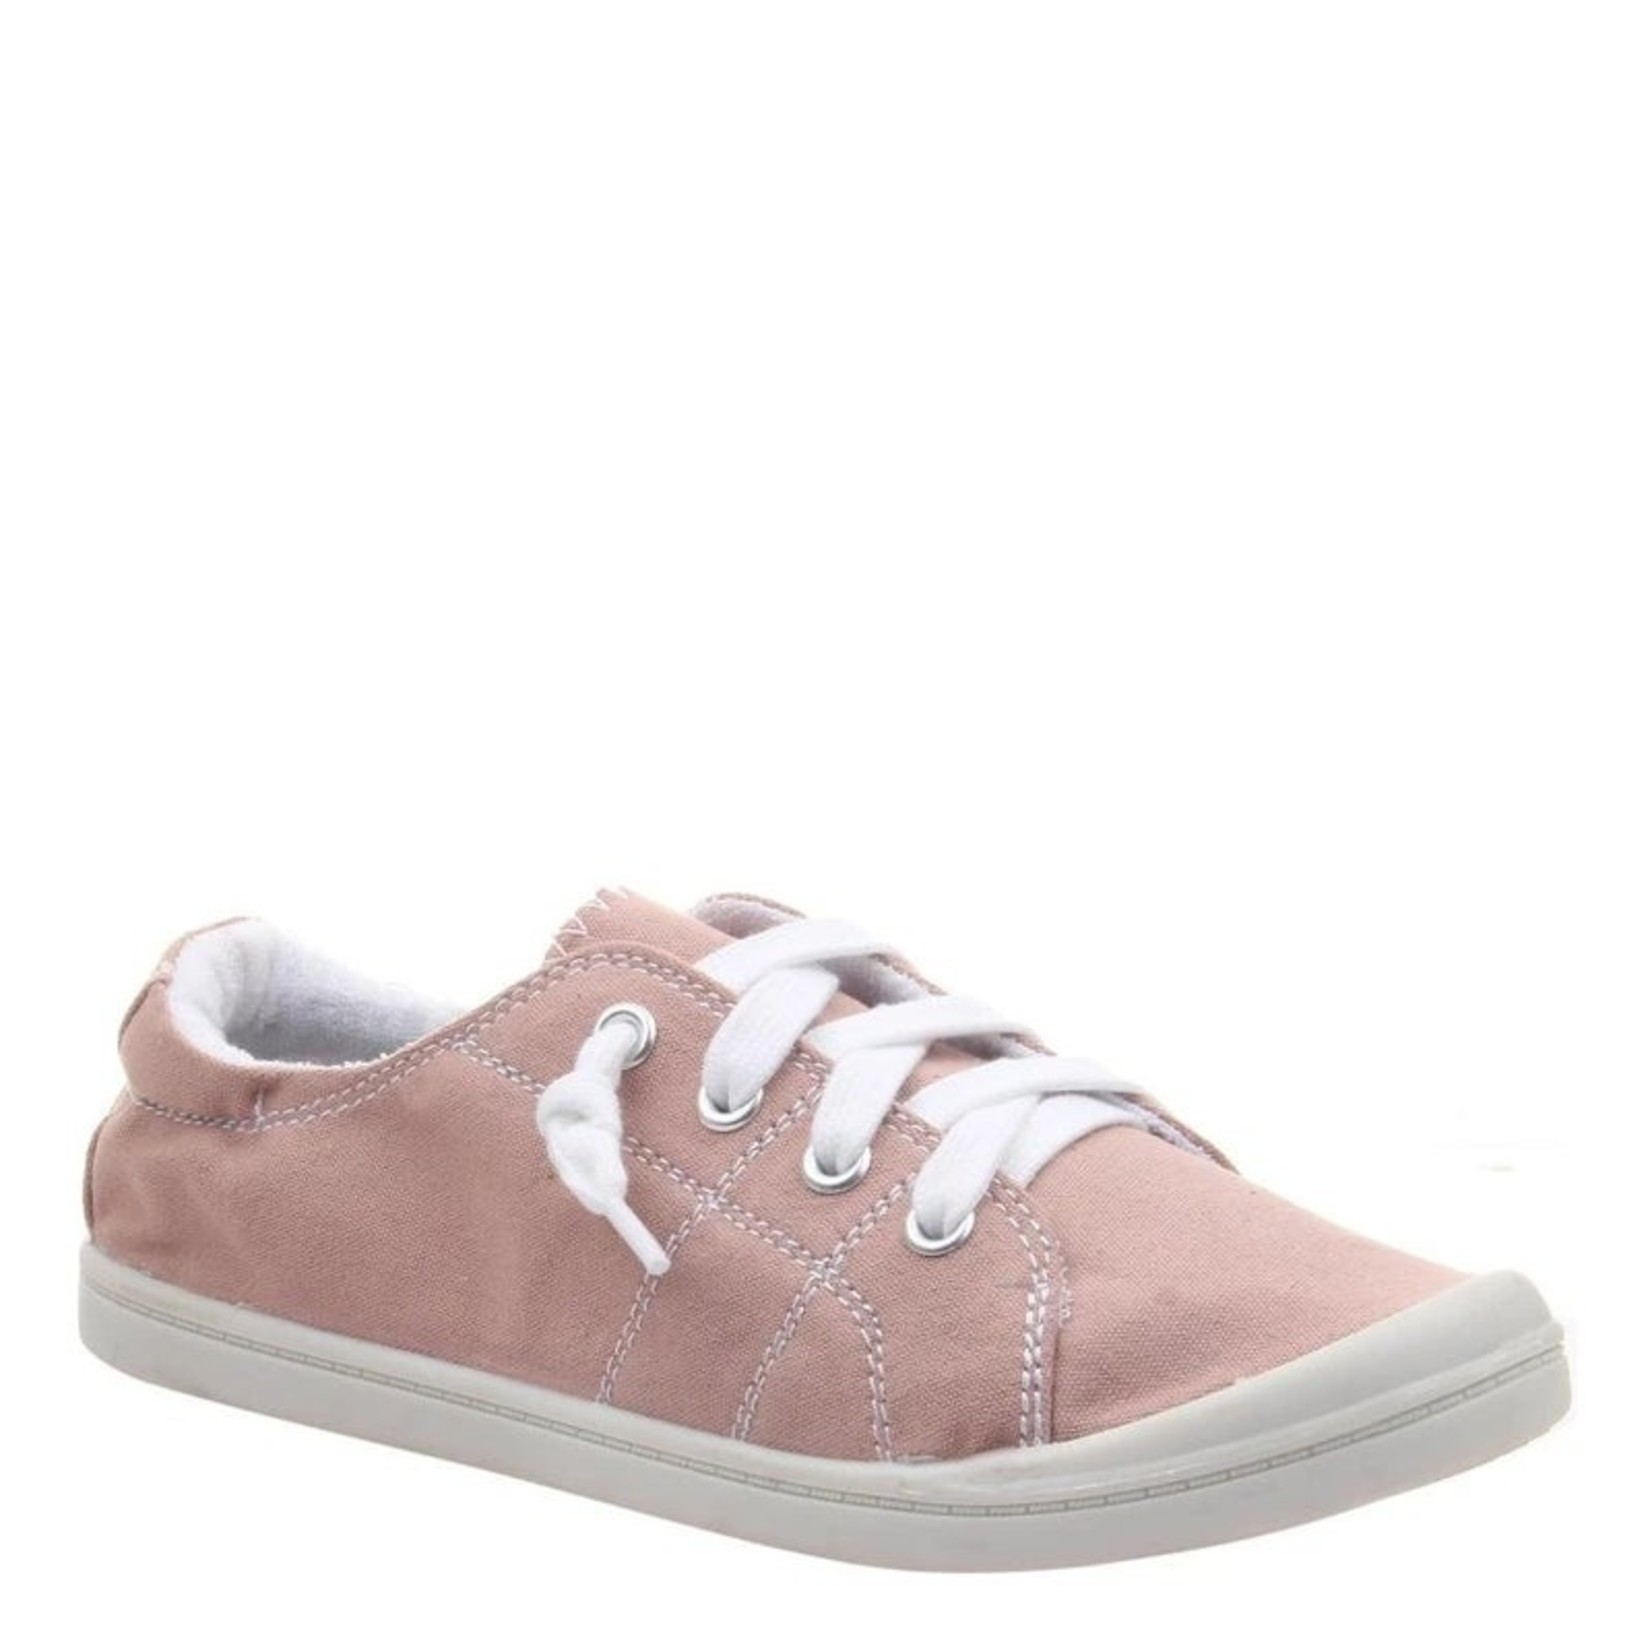 Blush Canvas Sneakers